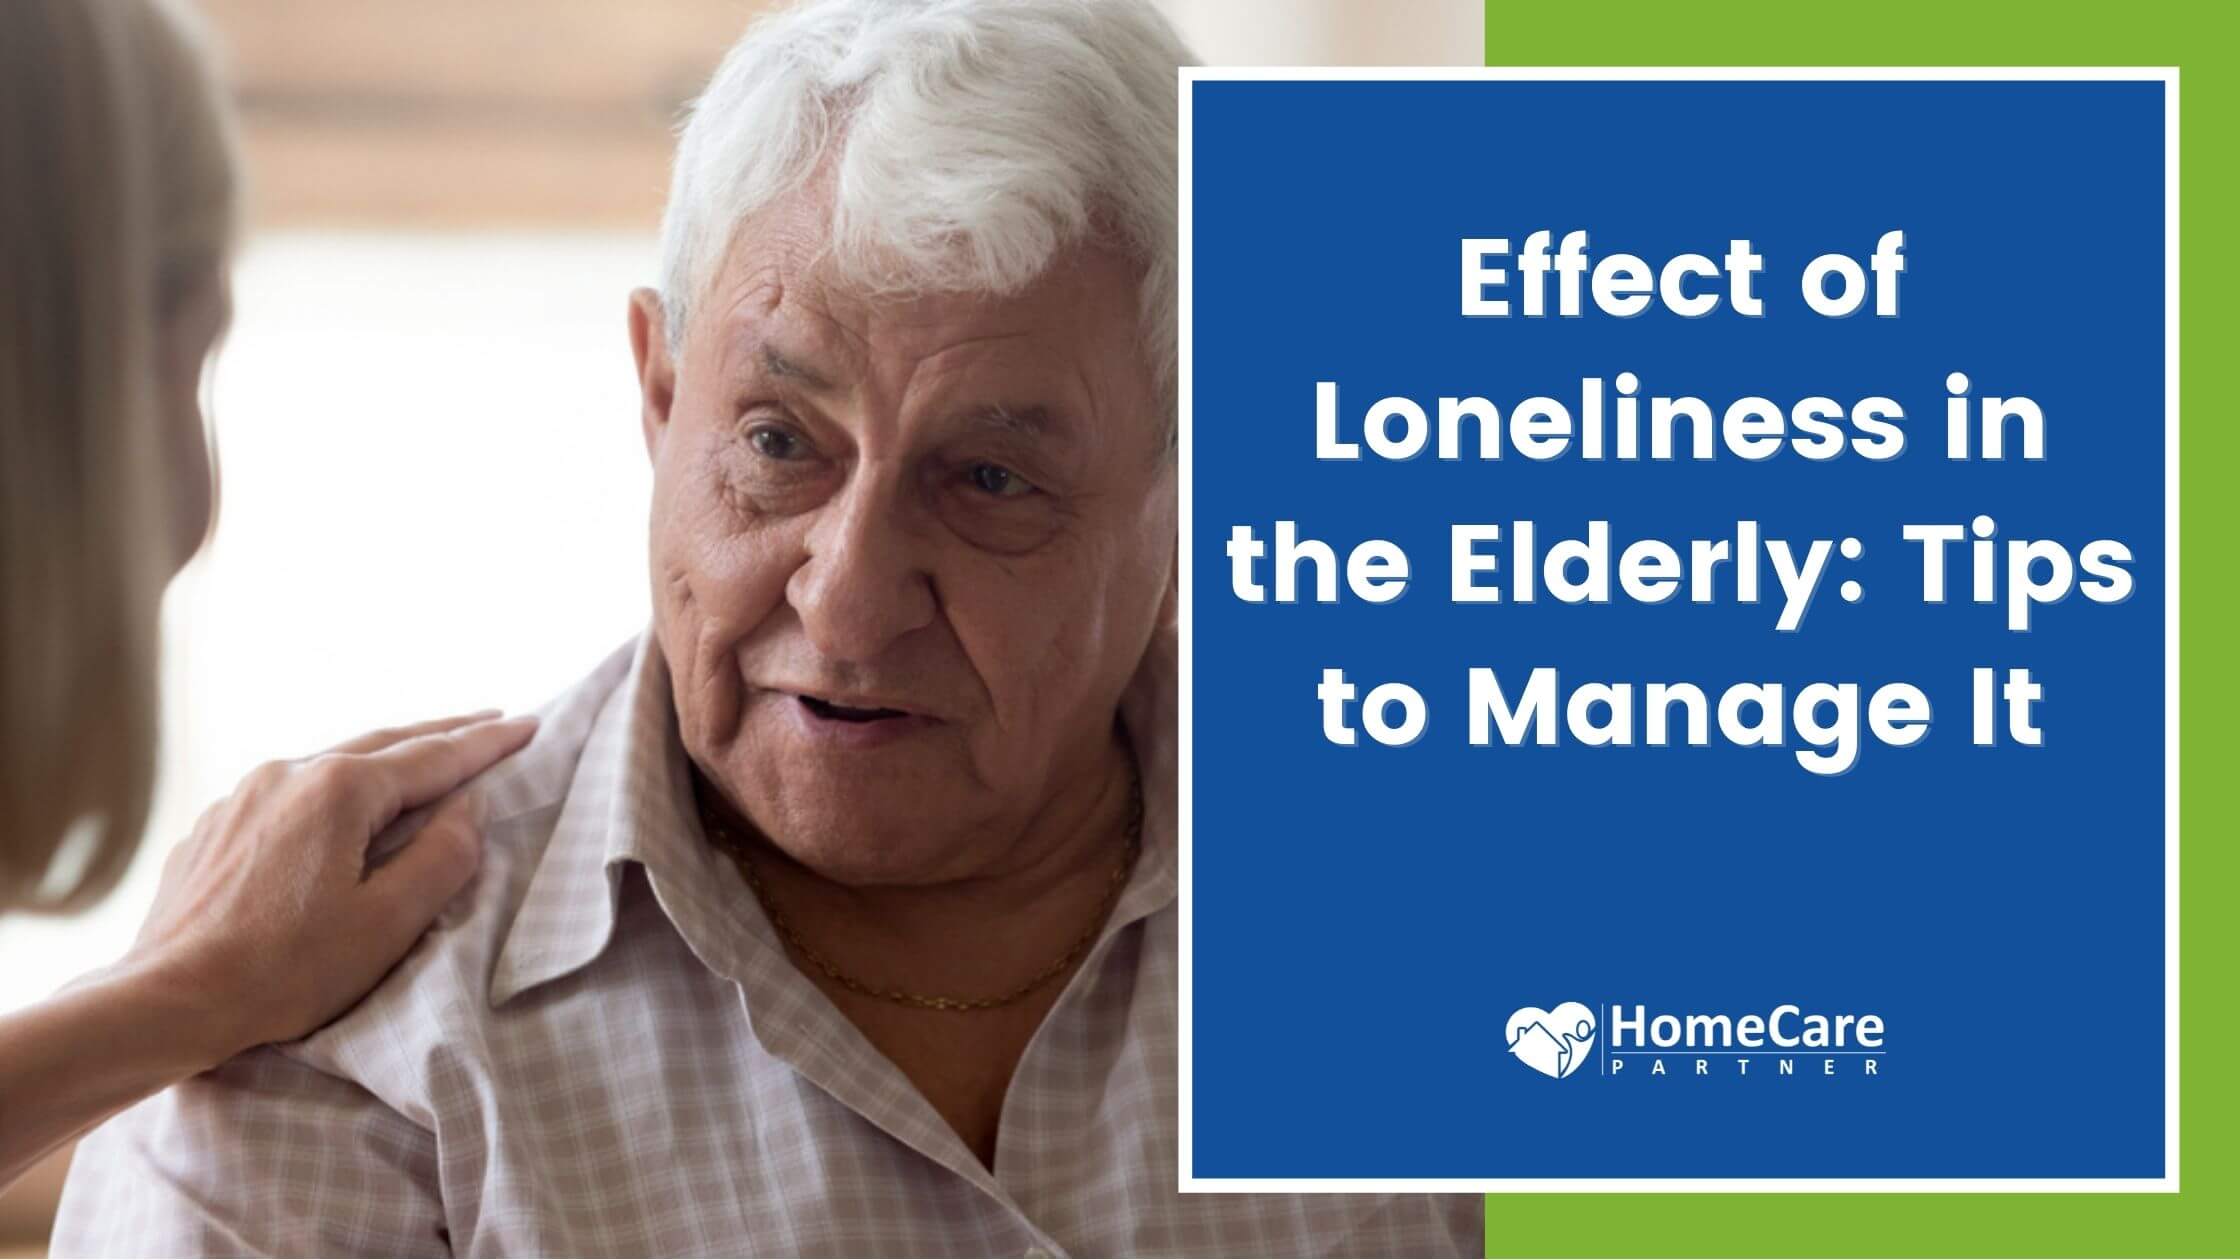 Effect of Loneliness in the Elderly: Tips to Manage It